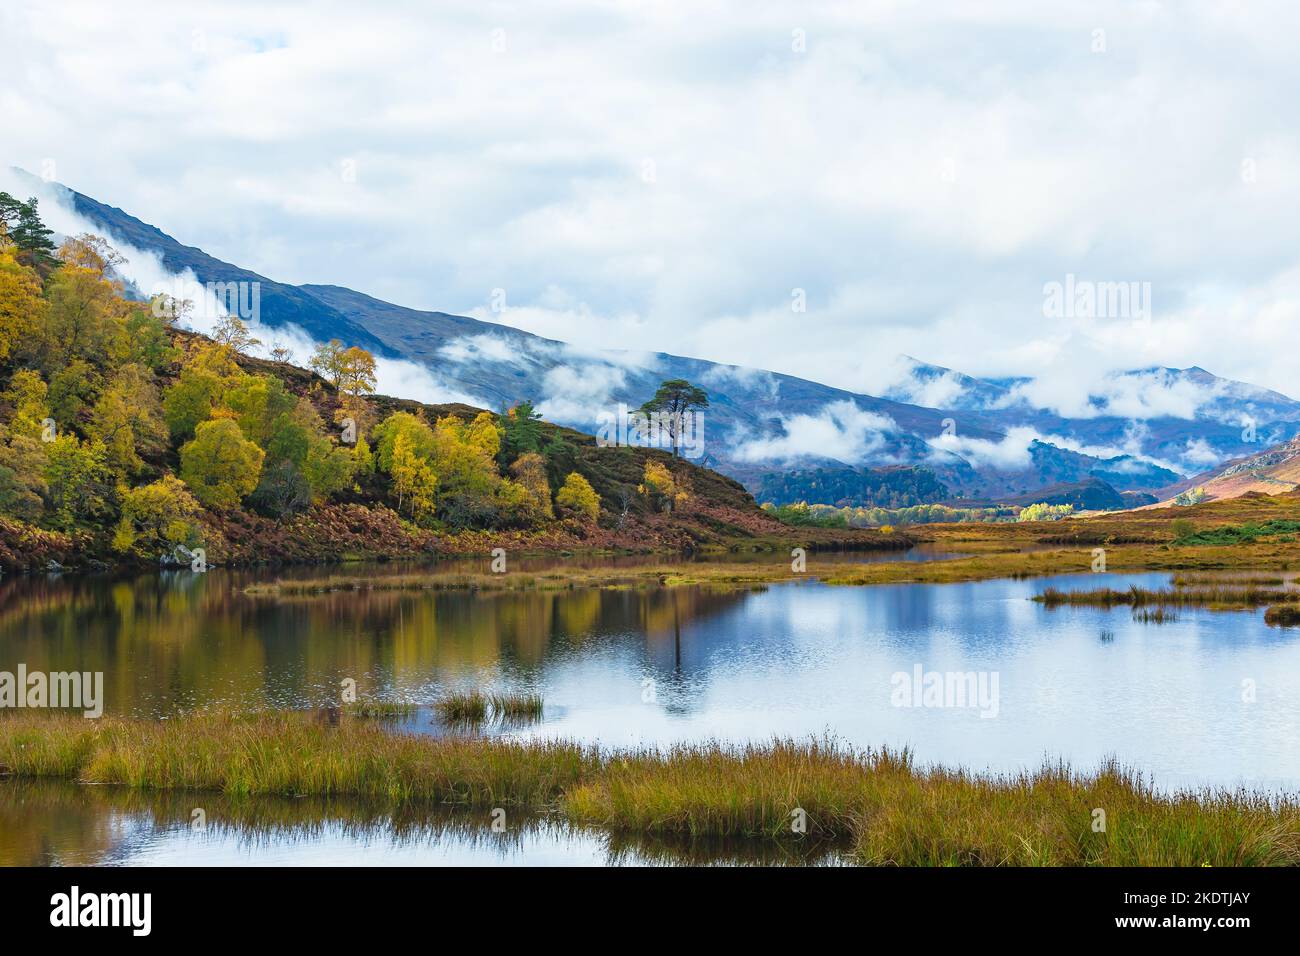 Glen Strathfarrar in Autumn with low cloud over the mountains, Scots Pine trees and reflections in the loch.  Scottish Highlands.  Horizontal.  Space Stock Photo